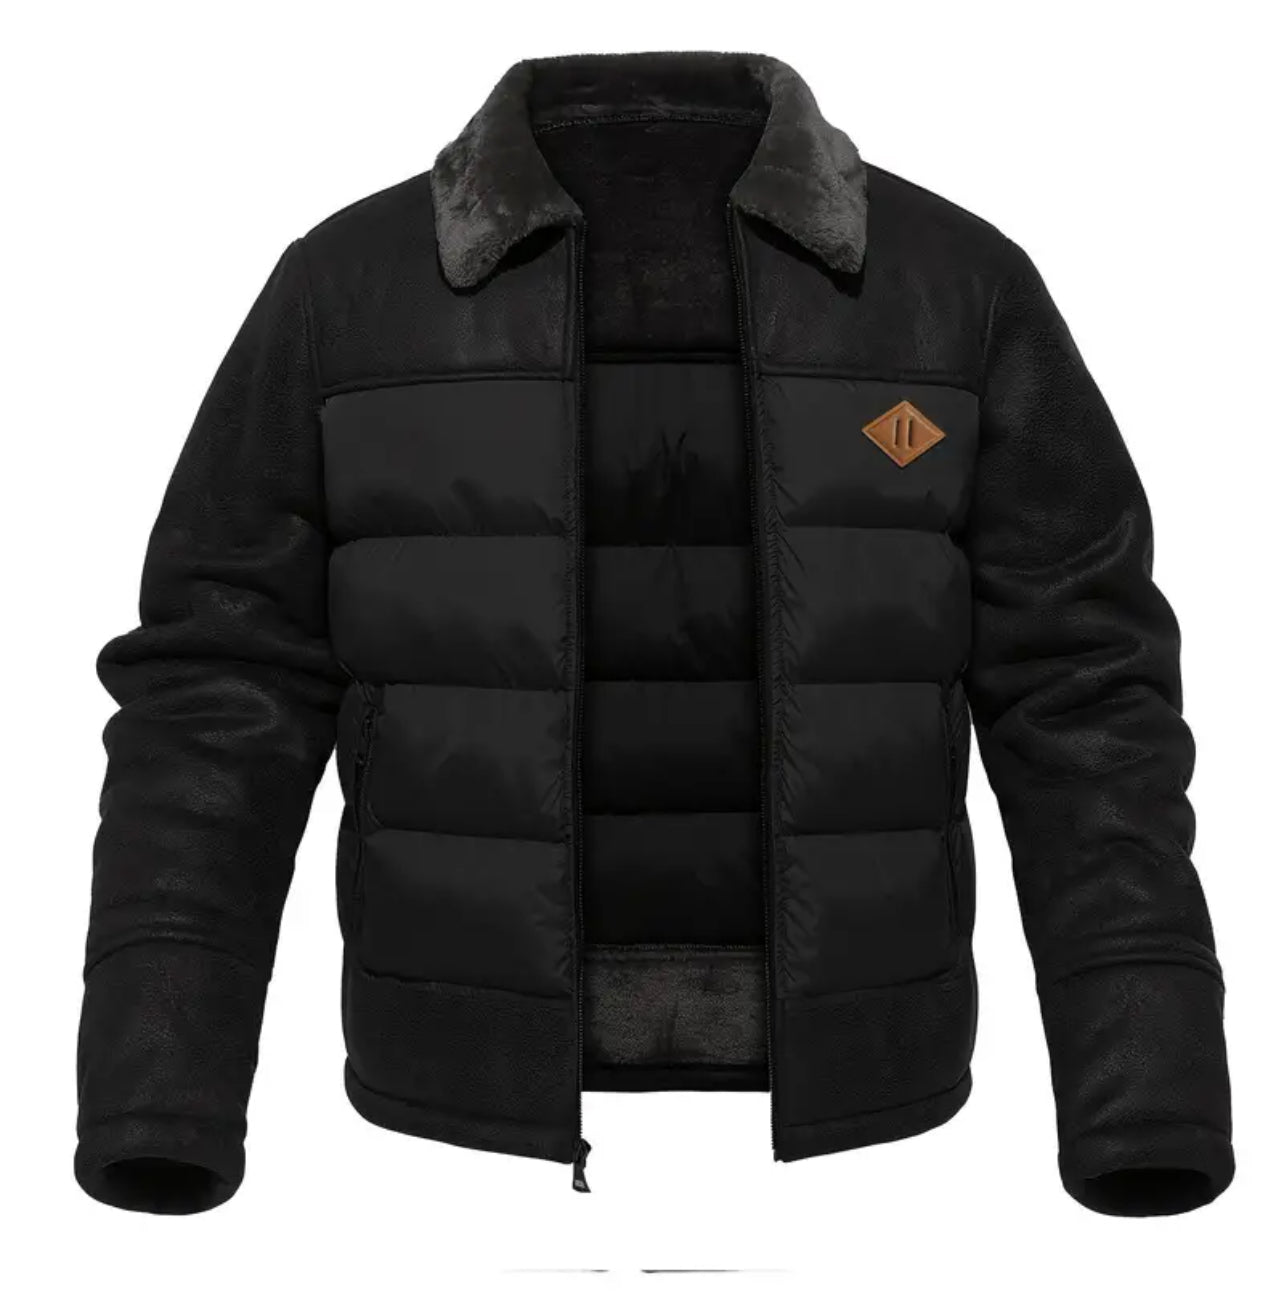 Men's Casual Warm Faux Leather Jacket, Chic Faux Fur Collar Quilted Jacket For Fall Winter